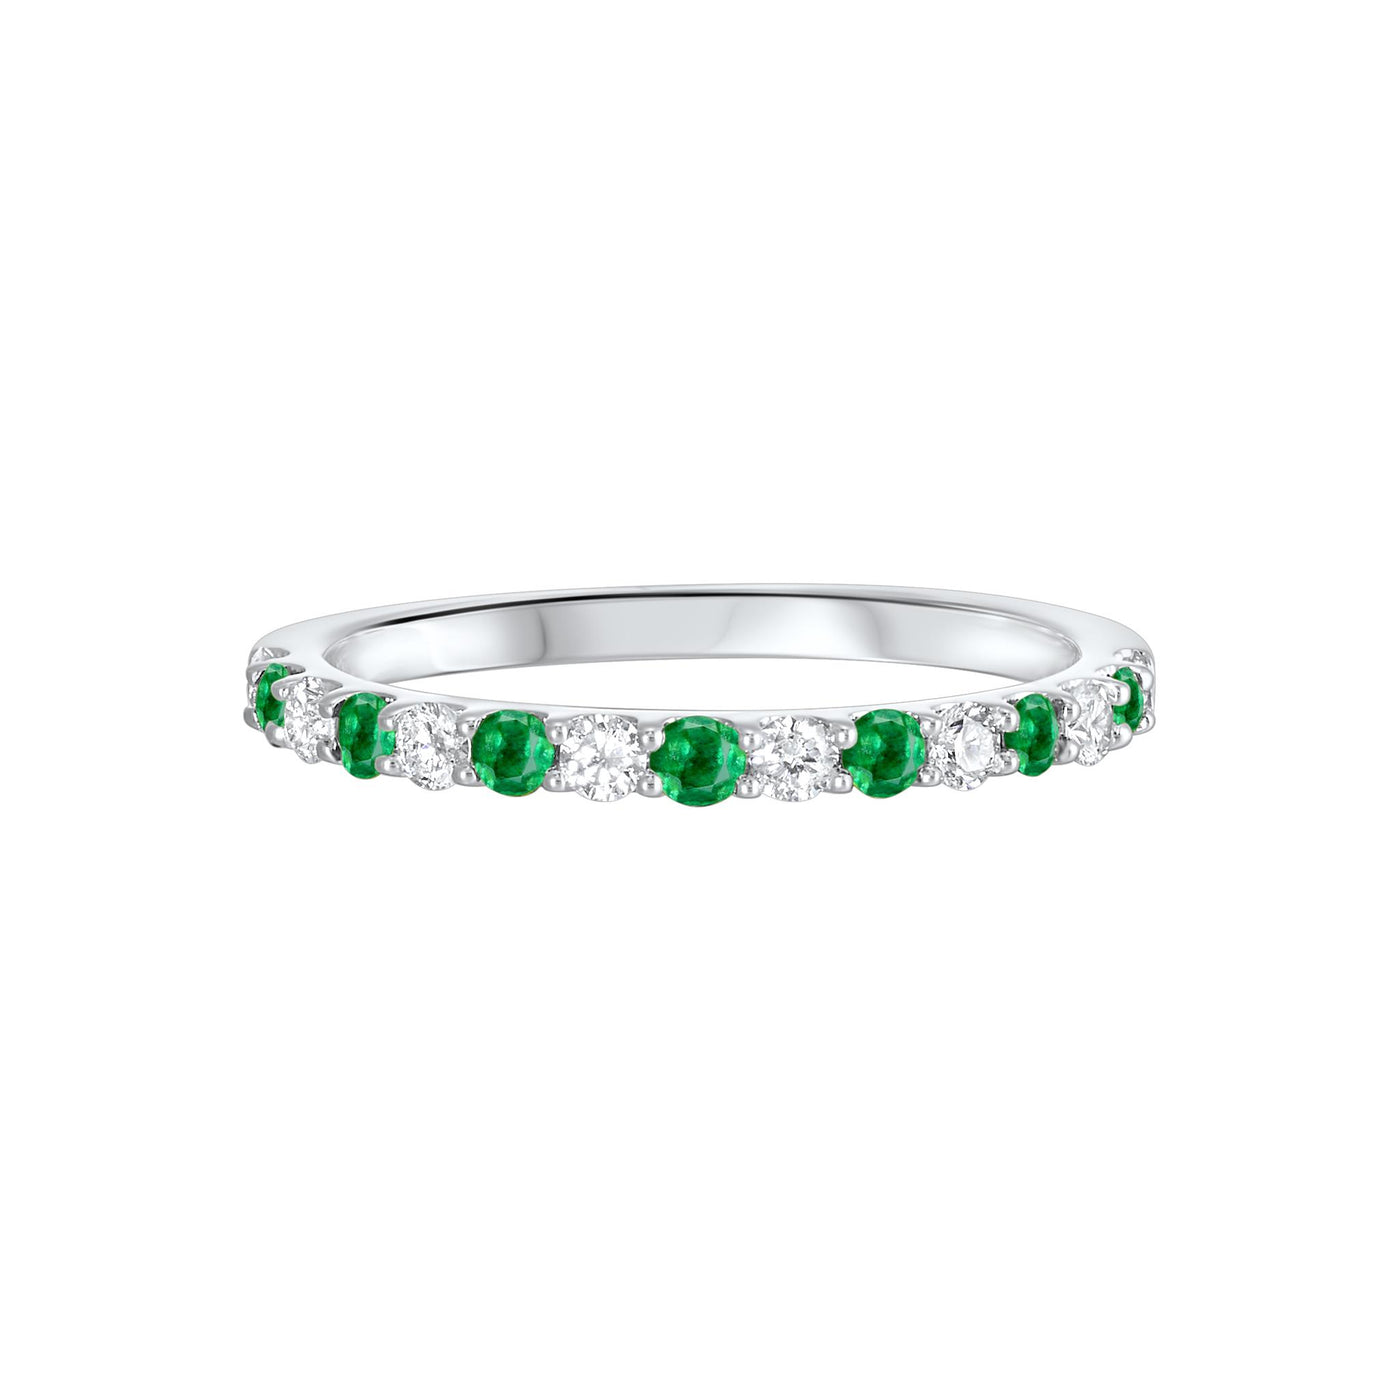 14K White Gold .58ctw Alternating Gemstone Style Ring with Diamonds and Emeralds